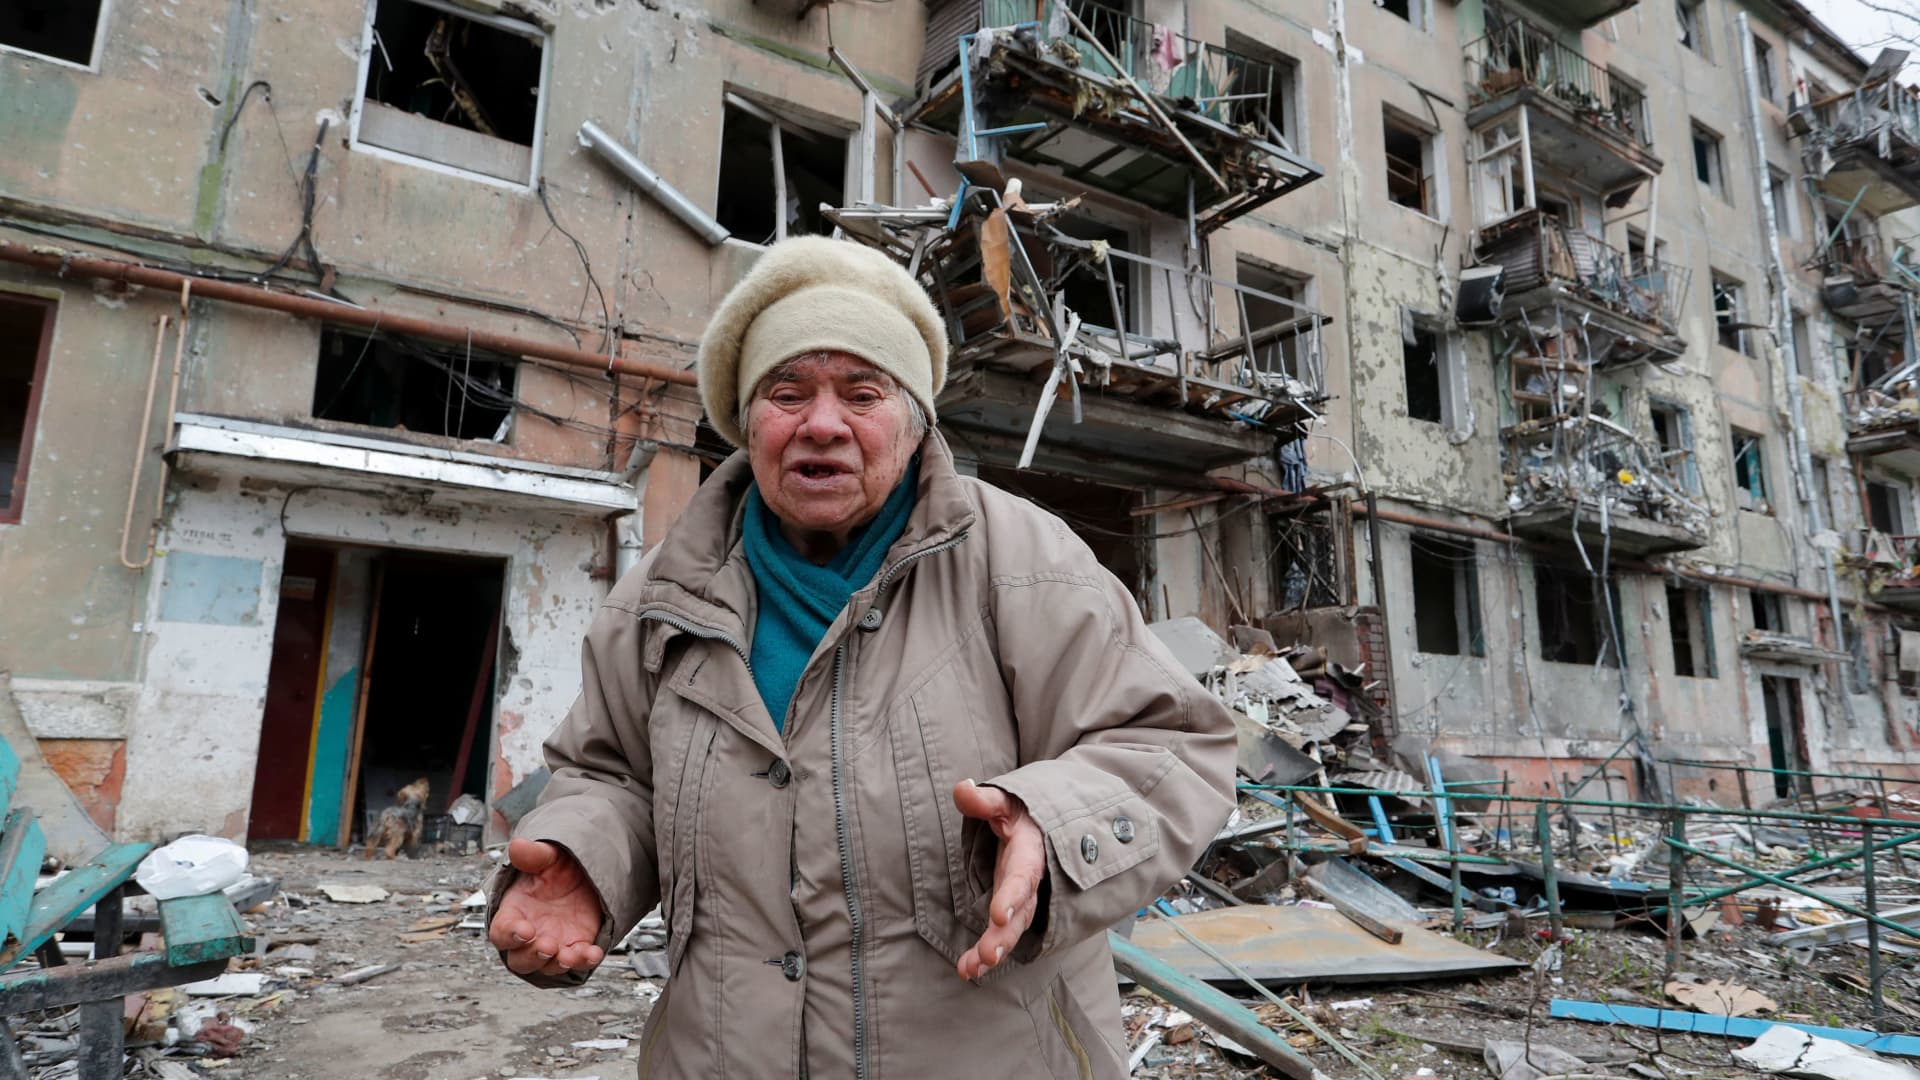 A local resident reacts while speaking outside a block of flats heavily damaged during Ukraine-Russia conflict in the southern port city of Mariupol, Ukraine April 18, 2022.